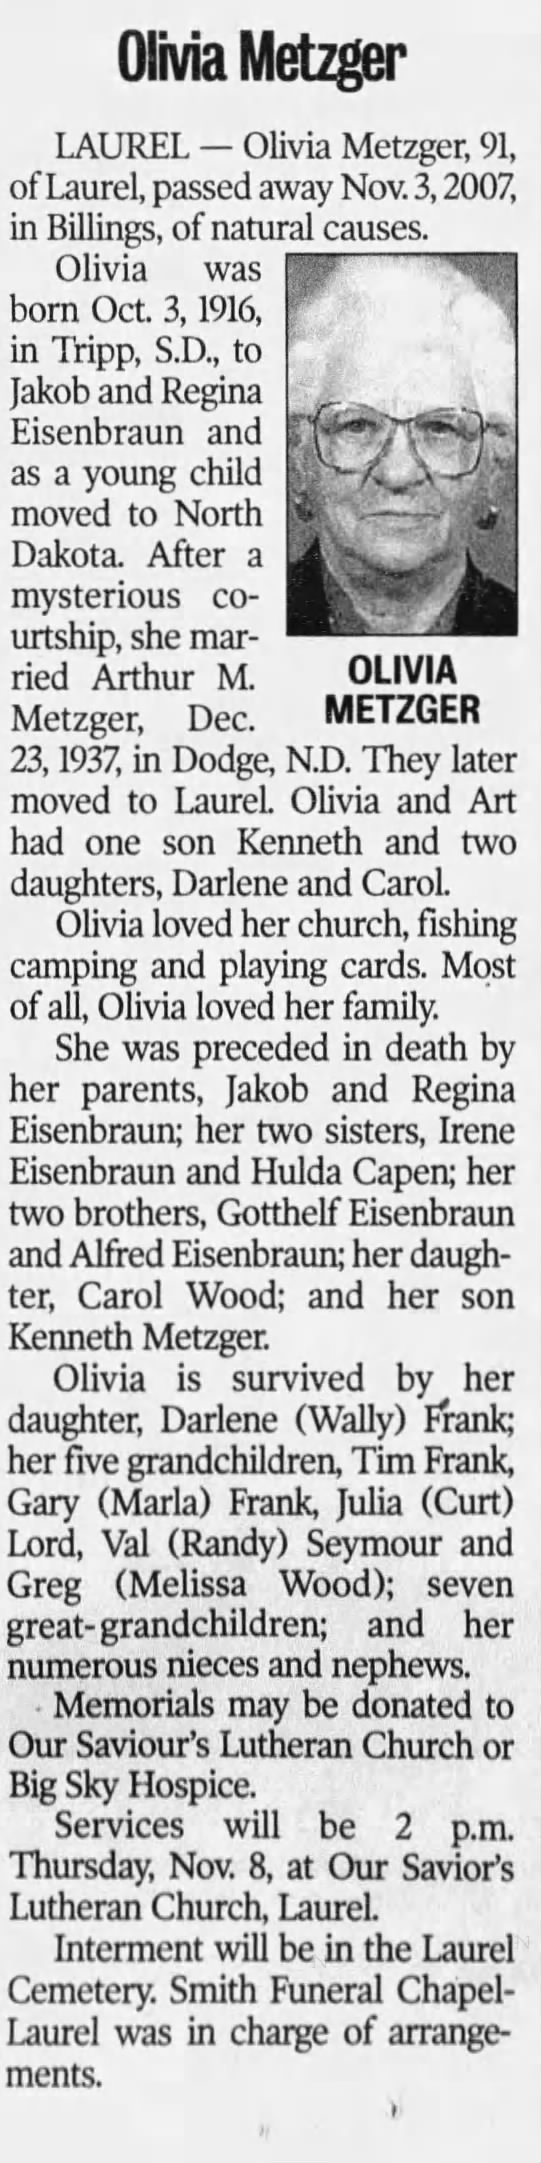 Obituary for Olivia Metzger, 1916-2007 (Aged 91)